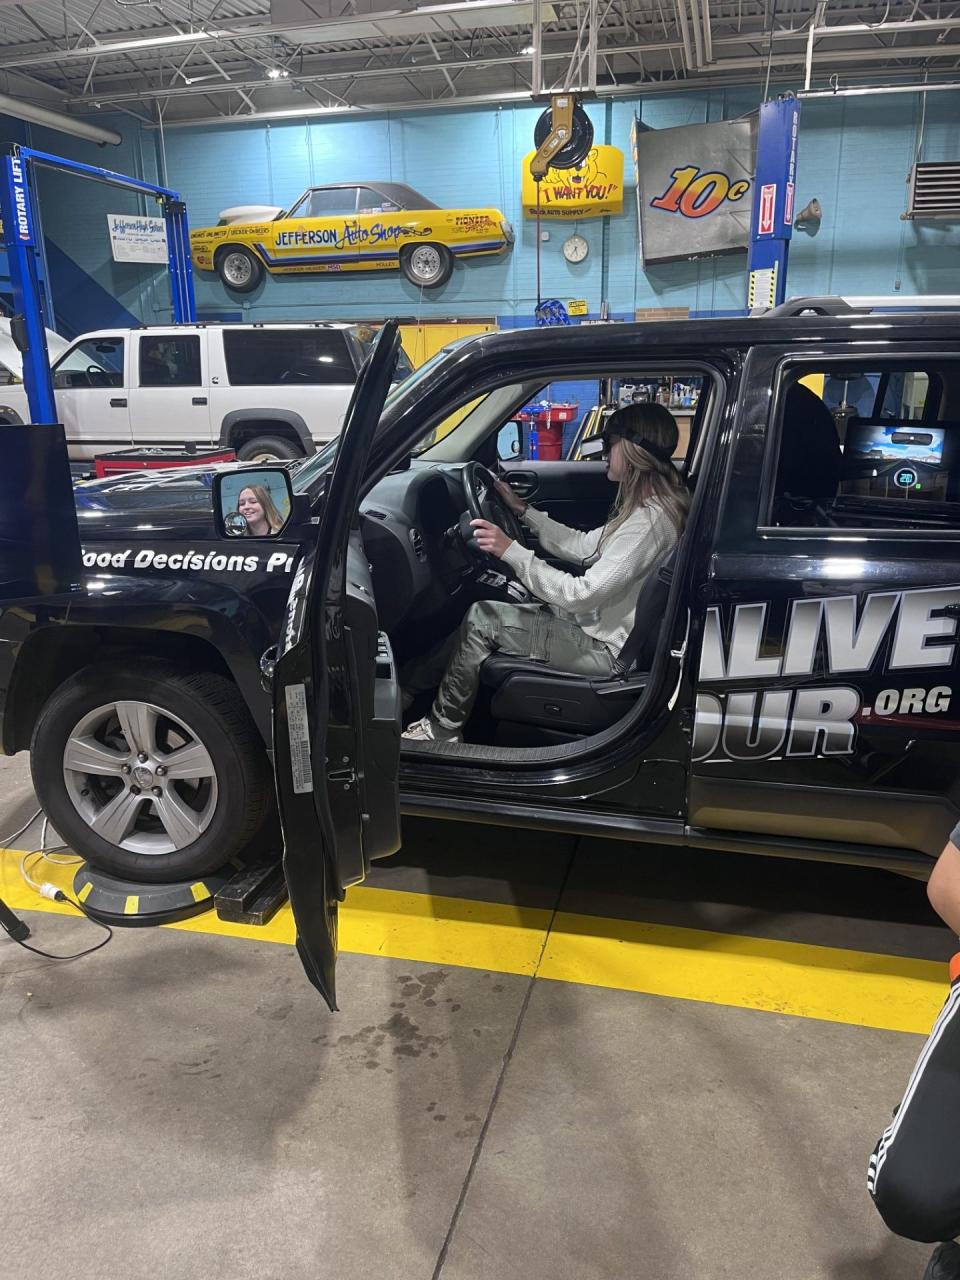 Student Katherine Scroi is shown in the Arrive Alive car earlier this week at Jefferson High School.